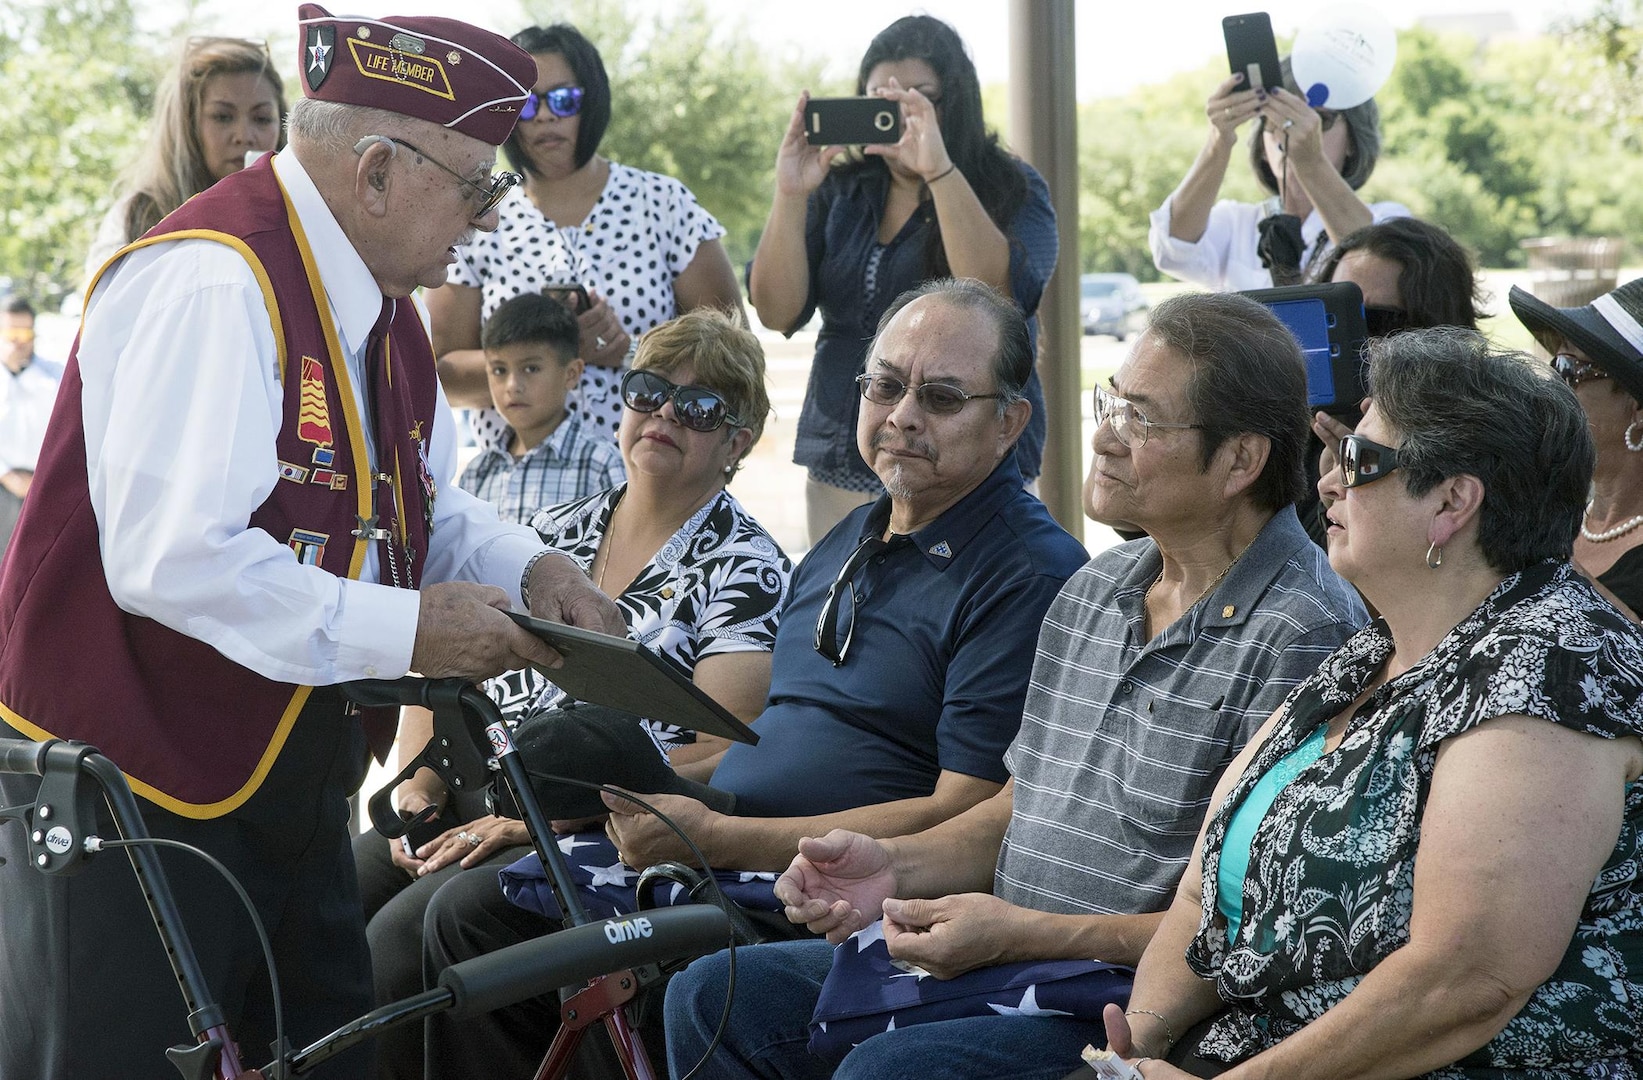 Oscar Cortez (left), a former Korean War POW who served in the same unit with Army Cpl. Frank Sandoval, presents a framed photo of the unit he and Sandoval served in while they were in action to Sandoval’s sons, Frank Jr. and Alejandro, July 11. Cortez, 85, said the photo was taken three to four days before their unit was captured.